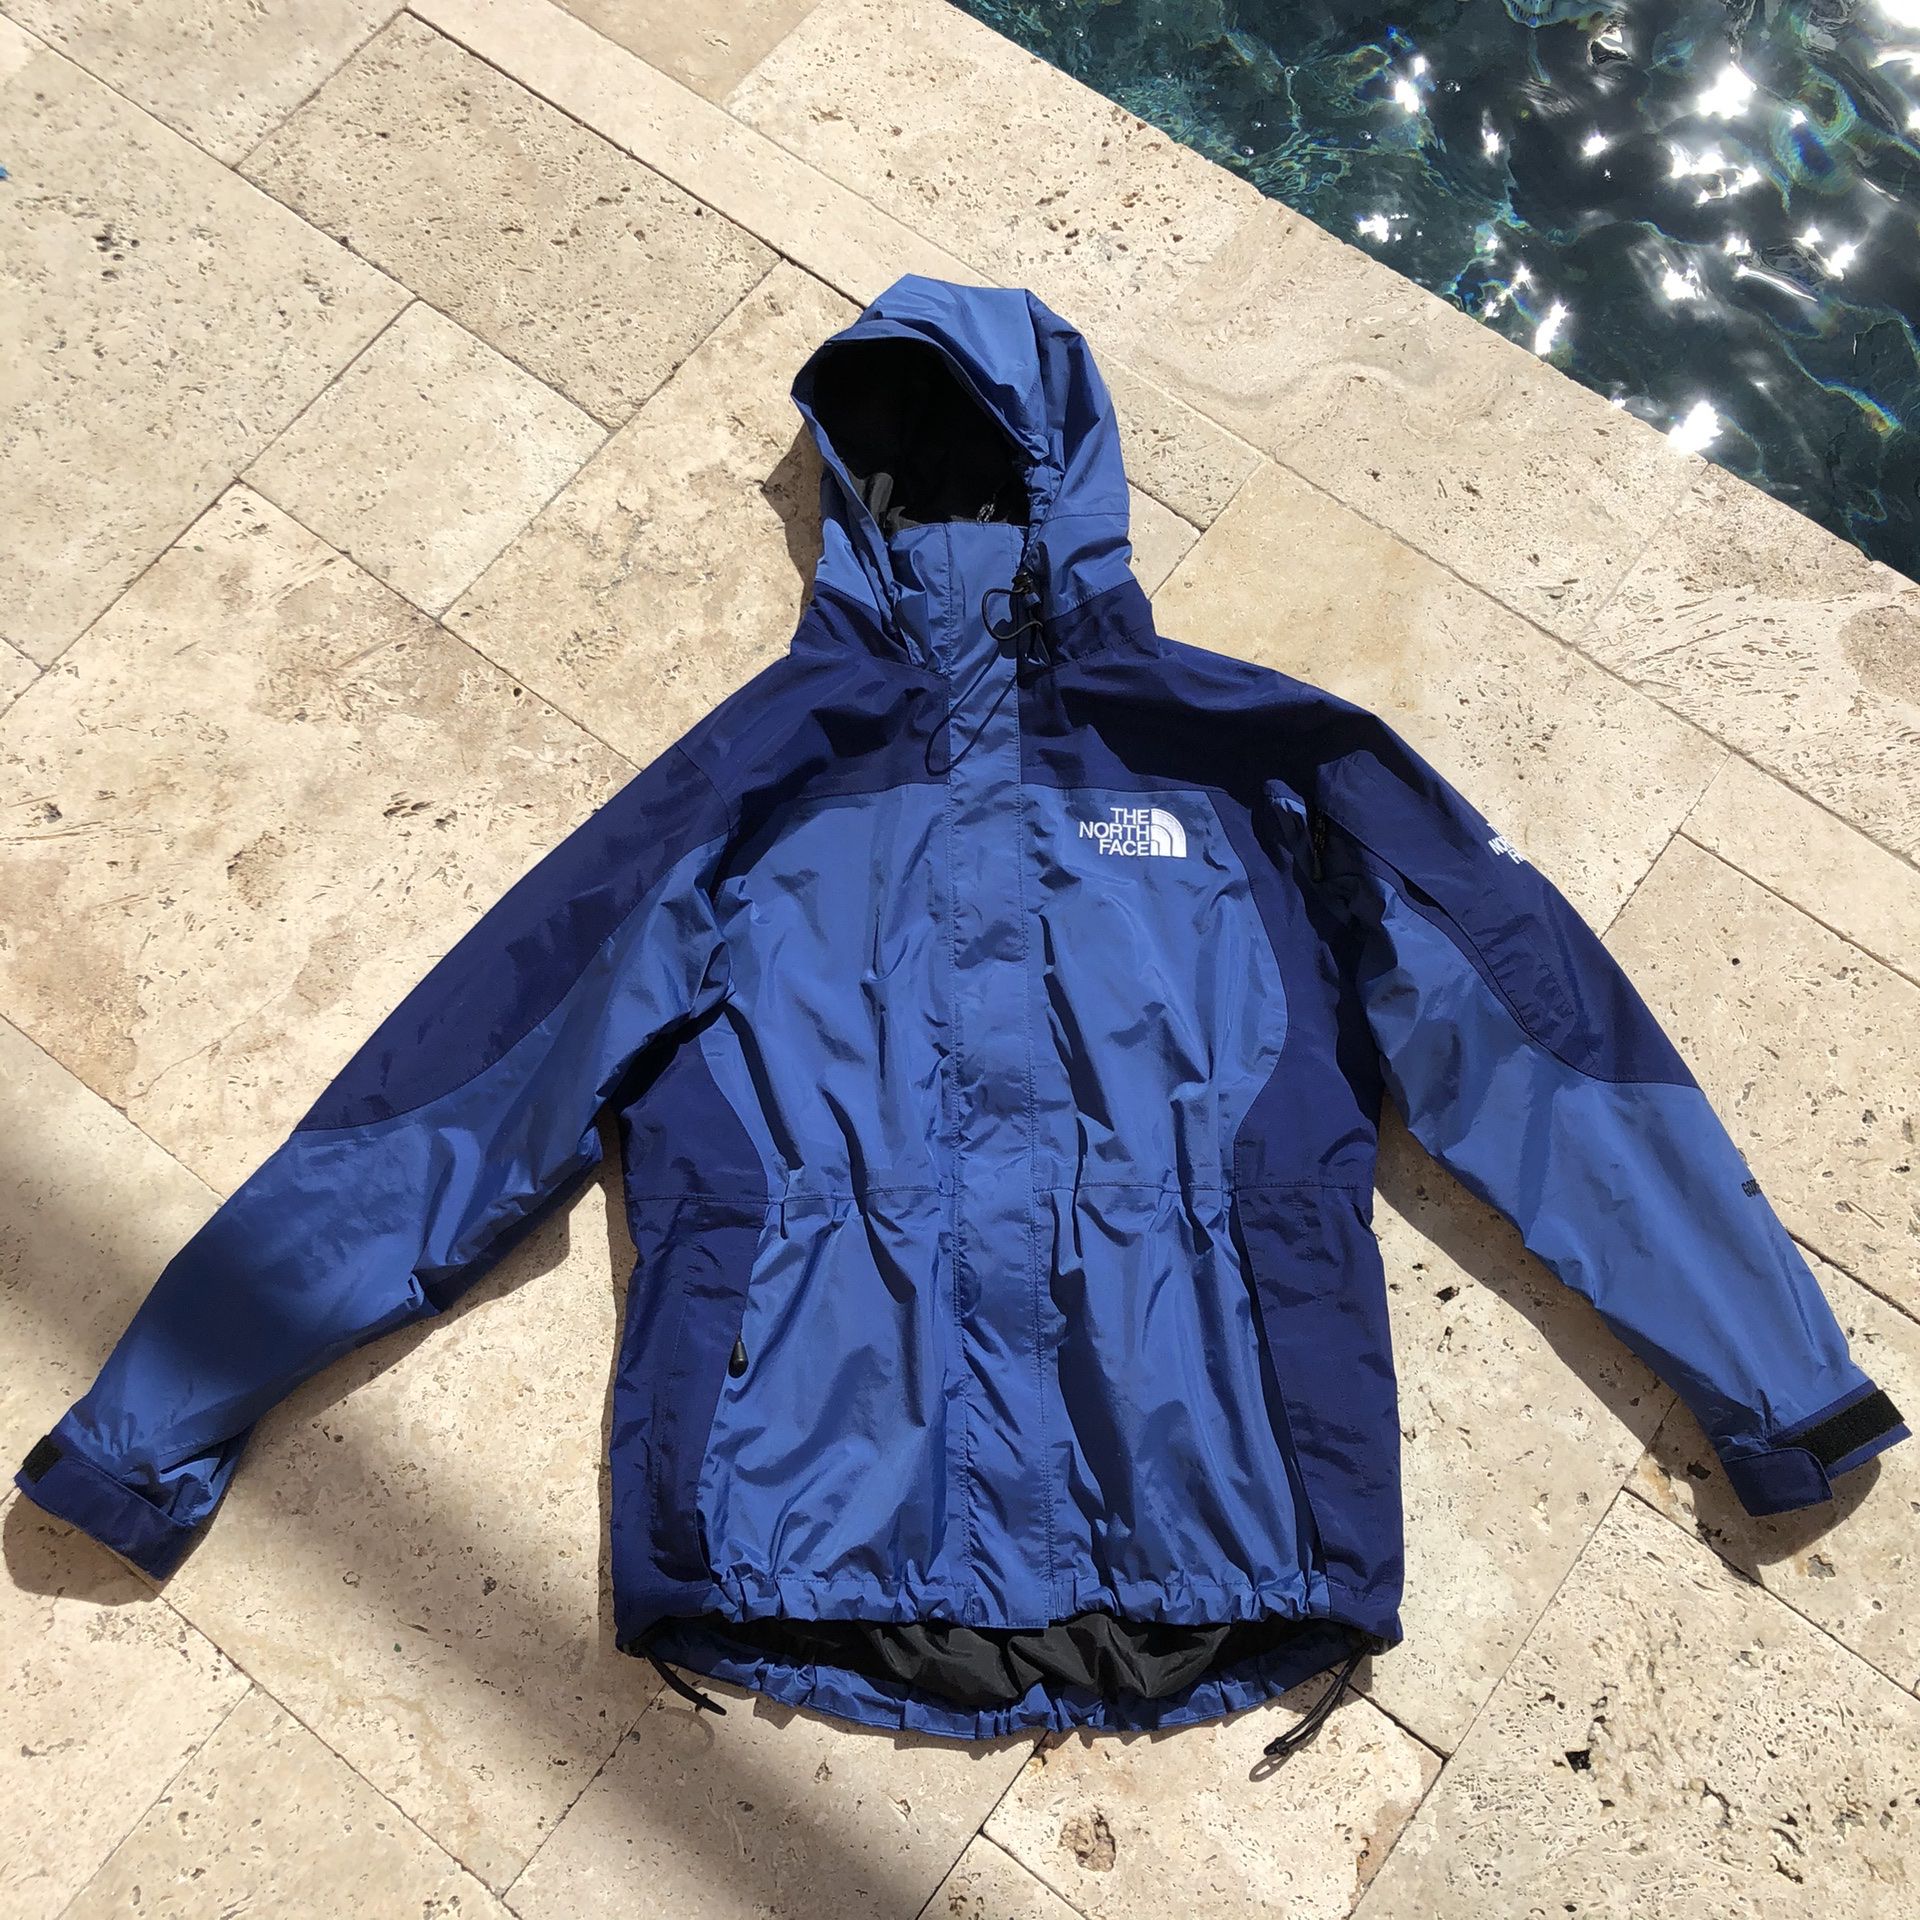 North Face Gore Tex Jacket Size Large